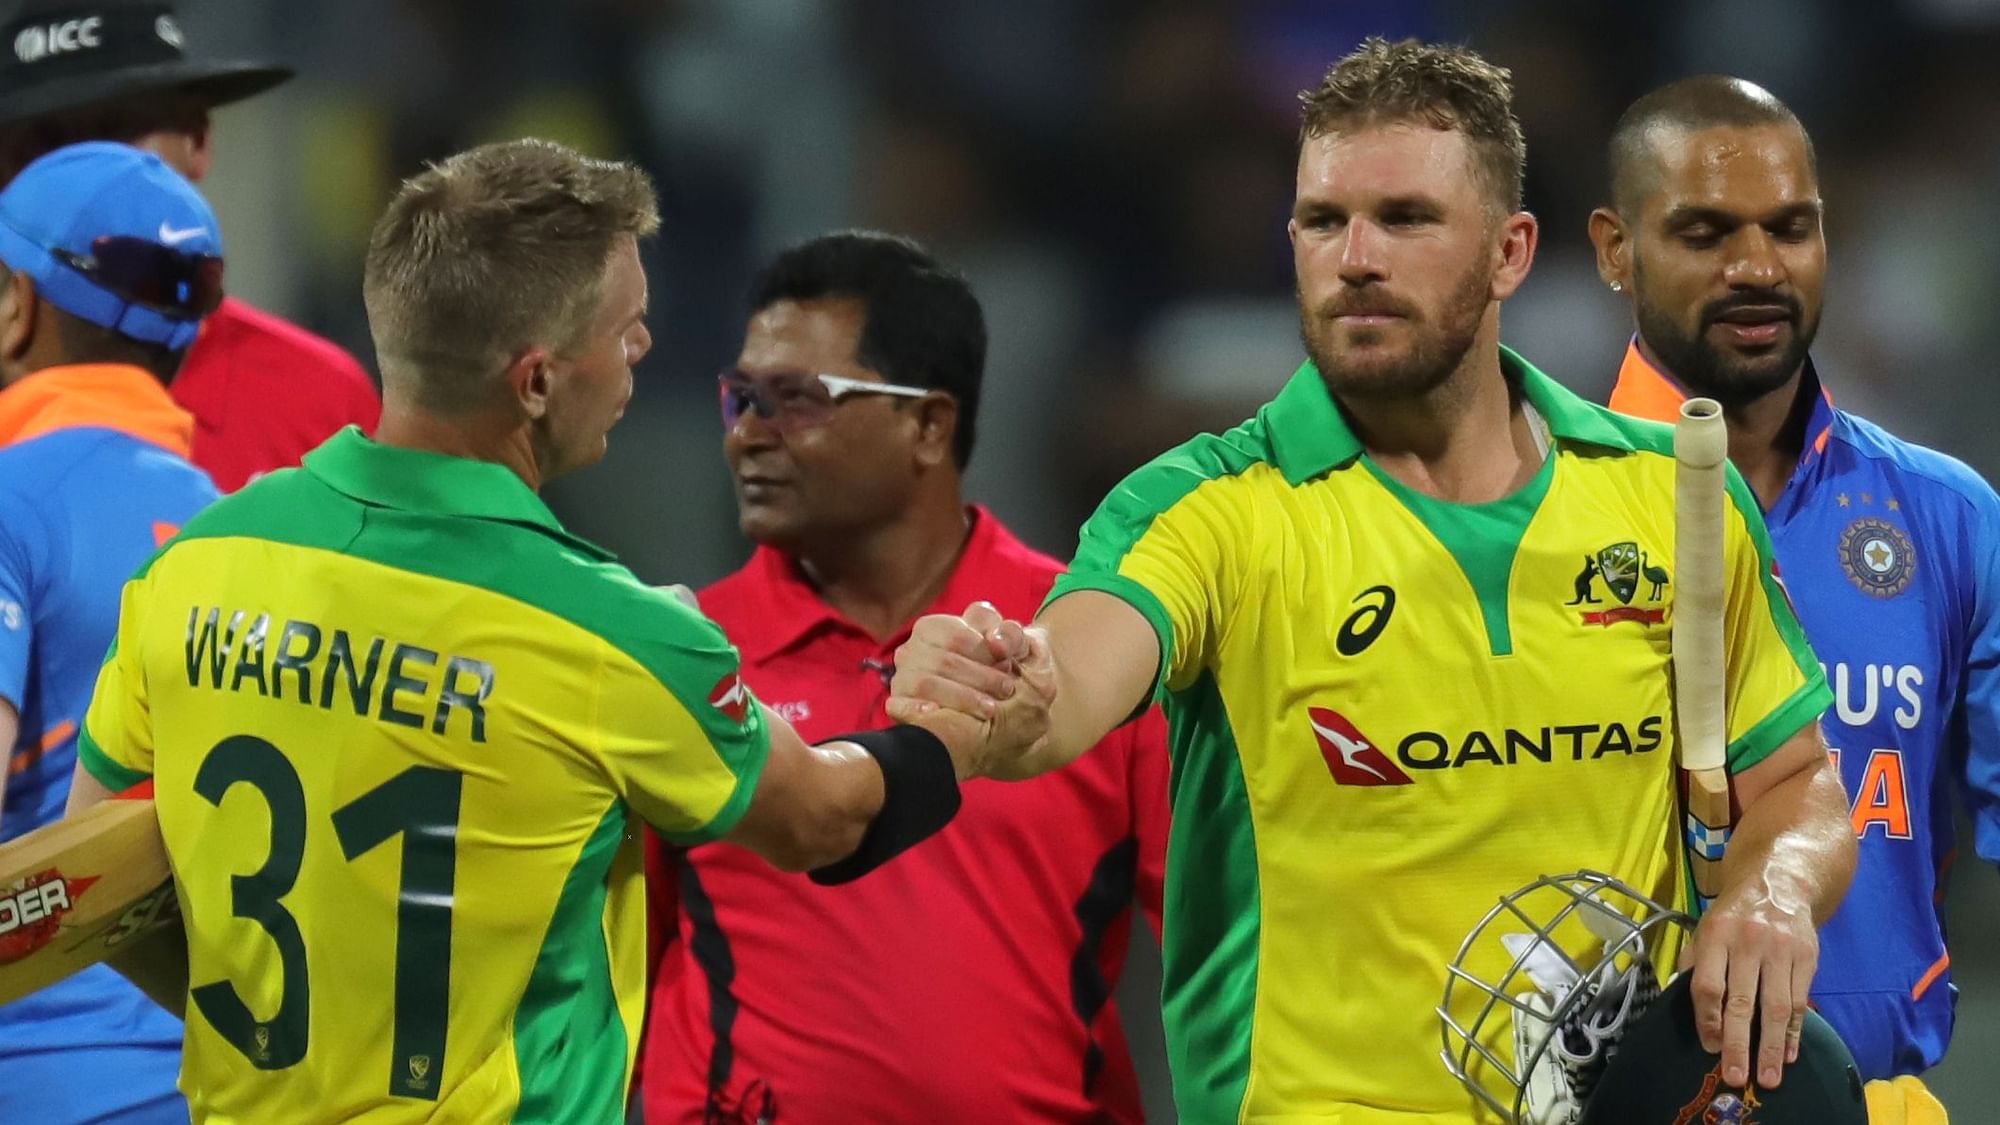 David Warner and Aaron Finch celebrate as Australia win the first ODI between India and Australia held at the Wankhede Stadium, Mumbai on the 14th Jan 2020.&nbsp; &nbsp;